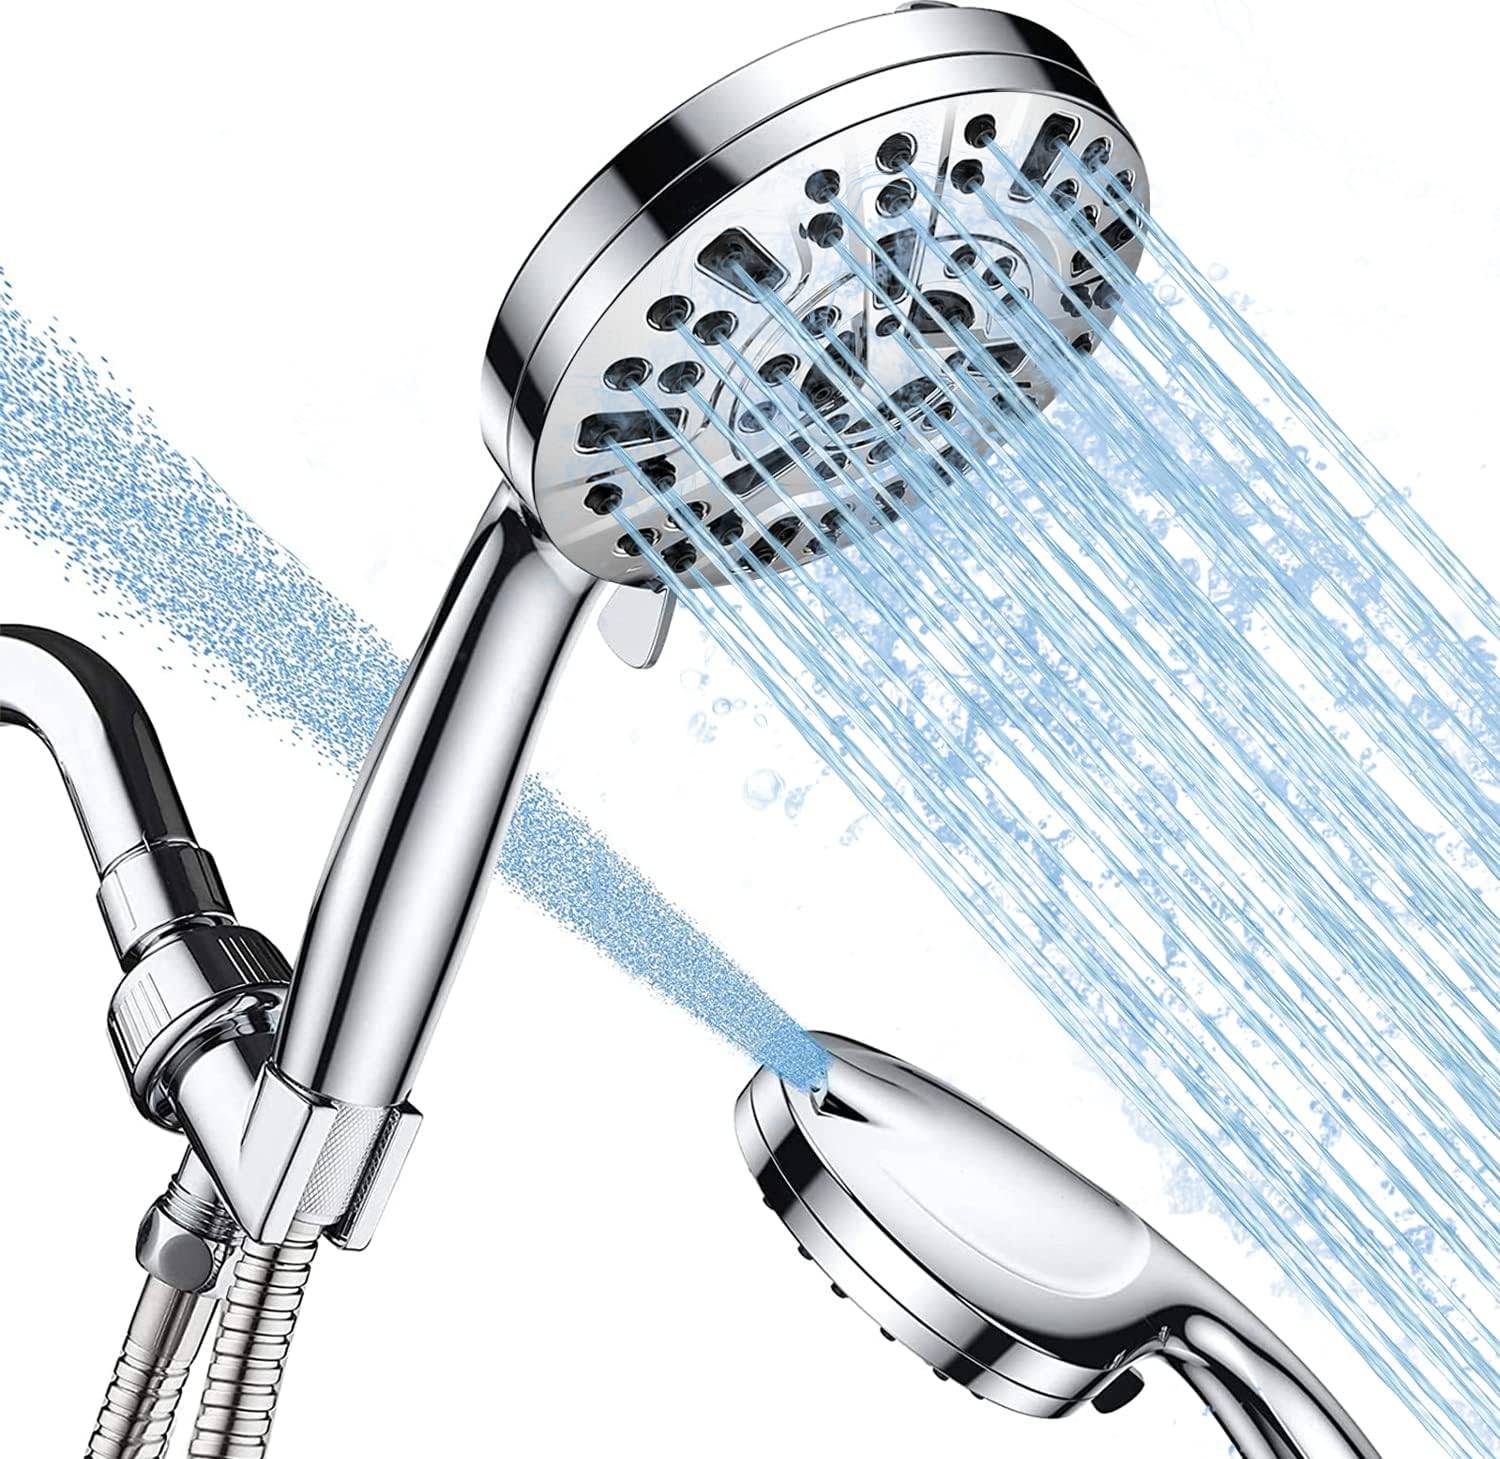 ✅ Shower Head, 10-Mode Luxury Handheld Shower Head, High Pressure Shower Heads with 59 inch Stainless Steel Hose and Adjustable Brass Bracket, All Chrome Finish
✅ 【MULTIFUNCTIONAL SHOWER HEAD】This handheld shower head comes with 8 spray functions, Saturating Spray, Saturating Massage, Massage, Massage Misty, Misty, Saturating Sweeping, Sweeping Spray, and Water Saving mode(Trickle mode) to pause water while shampooing, soaping up, or shaving. Excellent for everyday shower tasks as well as relaxing tired muscles. Gently rotating the handle on the shower head panel can switch the modes easily for a pleasant bath.
✅ 【HIGH-QUALITY MATERIALS AND ADVANCED CRAFT】This detachable shower head is made of high quality ABS chrome, the exquisite chrome plated surface makes shower handle lightweight, durable, rust-proof, fade-proof, lead-free and non-toxic, not easy to damaged when dropping from height, which ensures a safe and comfortable shower. Comfortable ergonomic designed handle makes for ideal balance, ease of use, and lightweight in the hand.